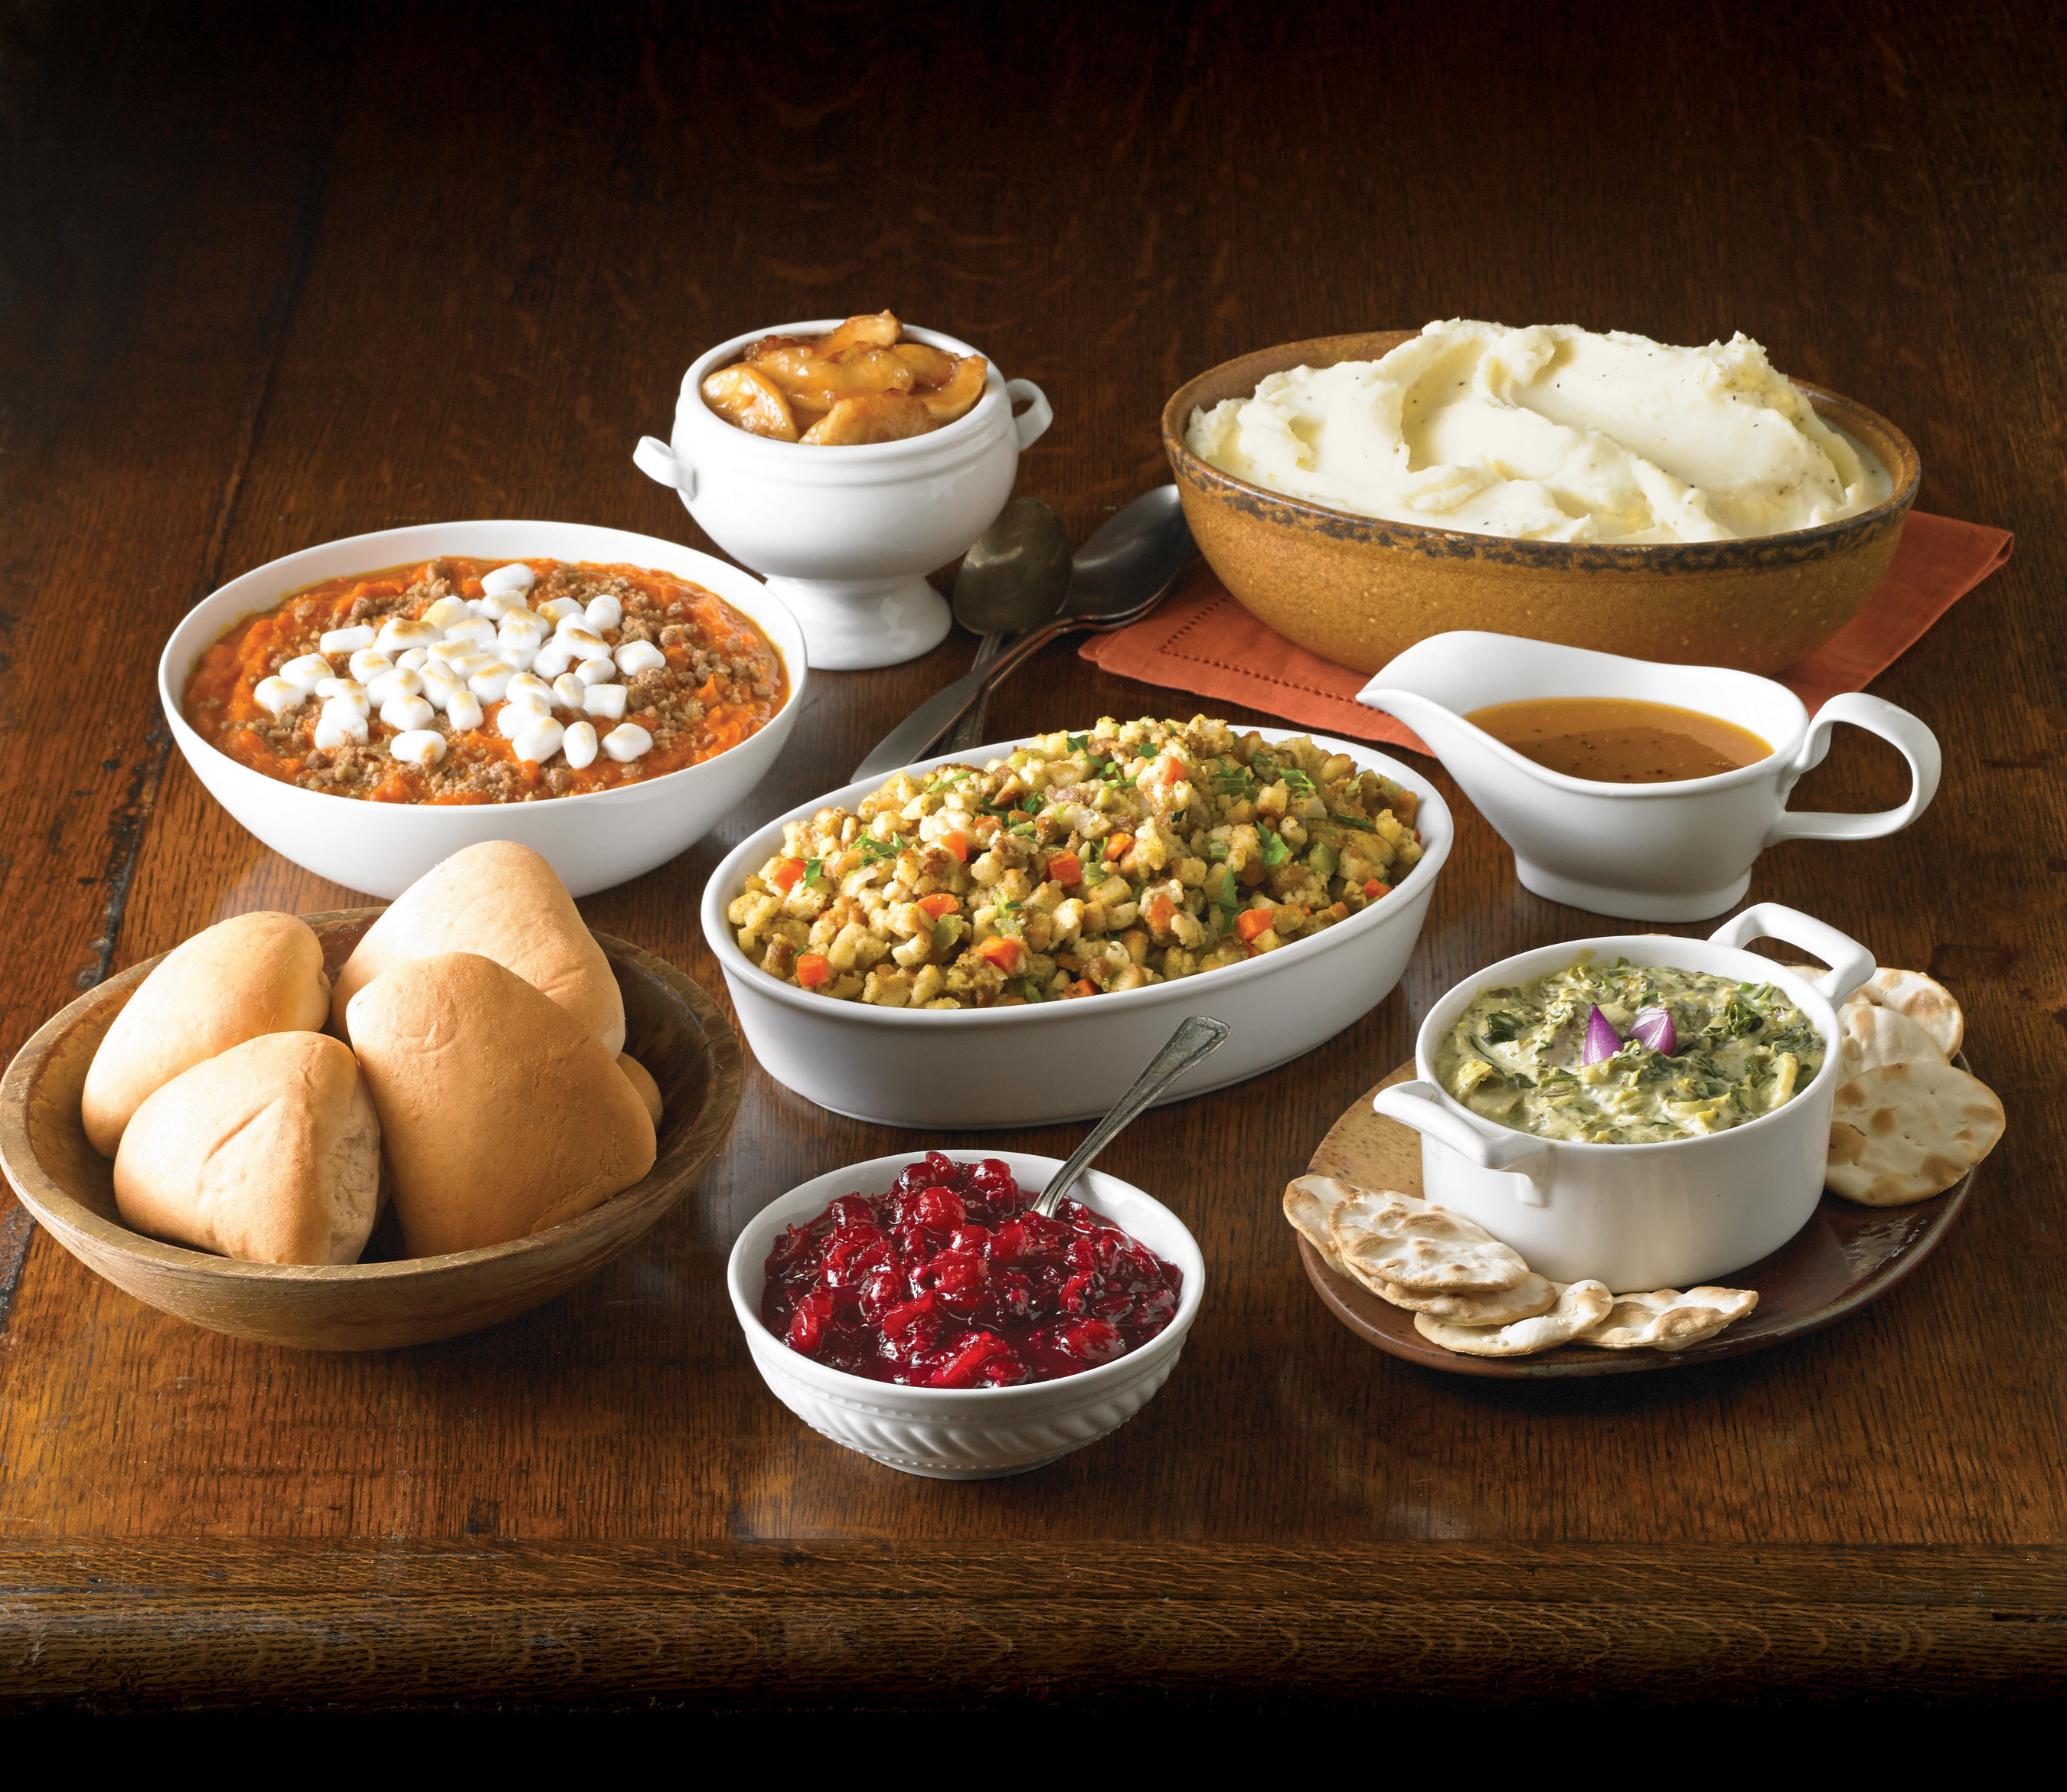 Boston Market has an array of individual sides, entrees, appetizers and desserts available for holiday.